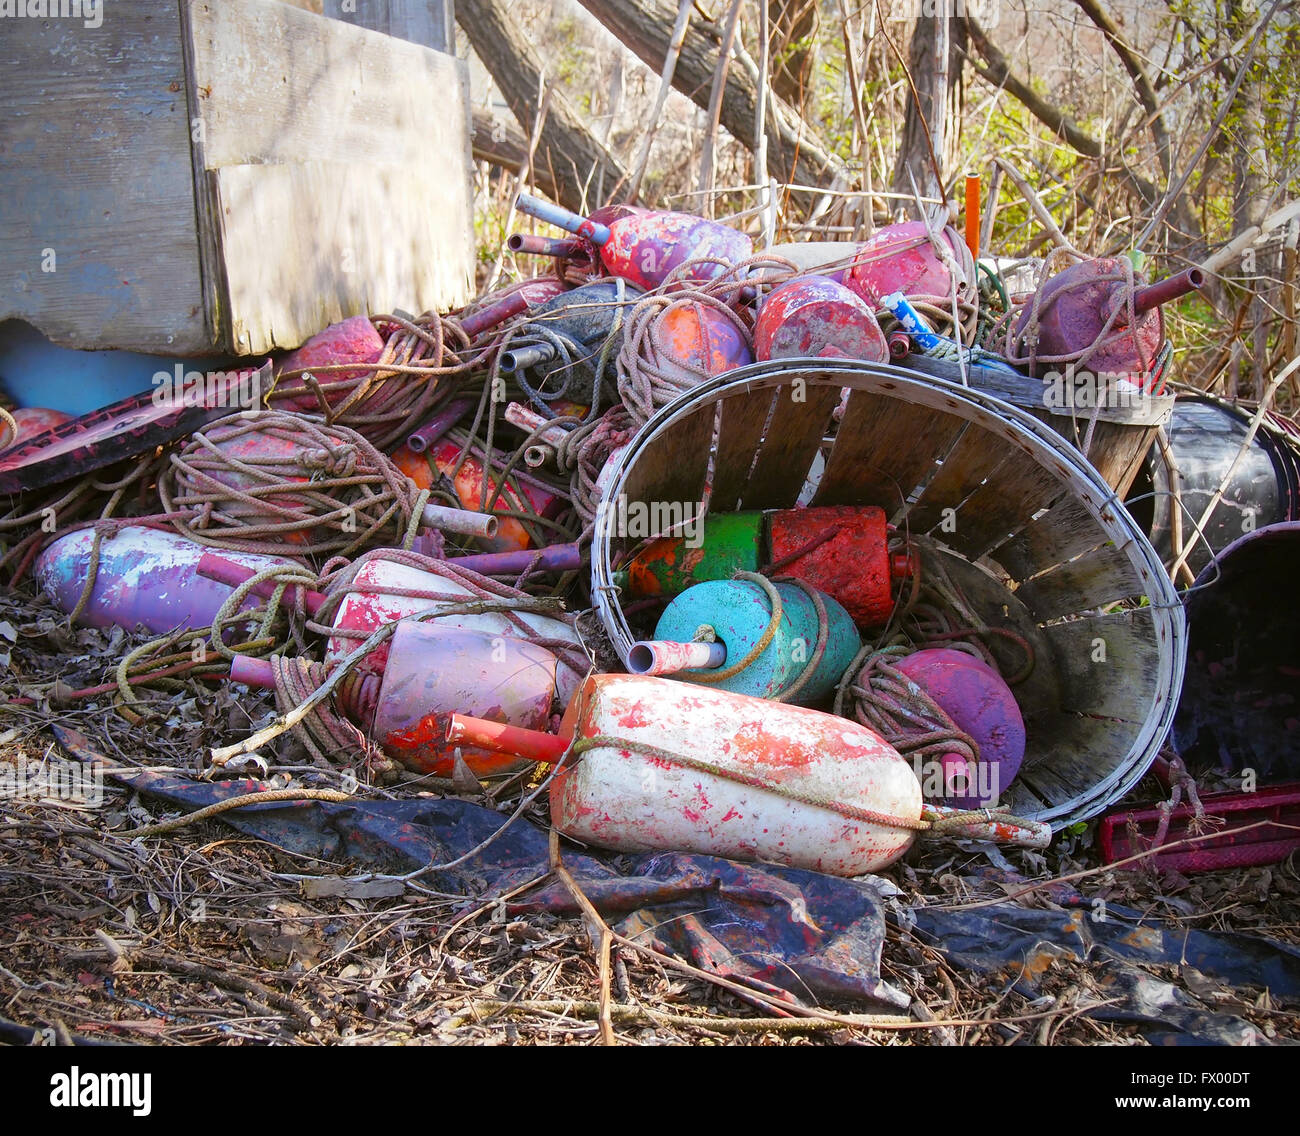 A pile of old buoys and tangled ropes with a bushel in the sticks. Stock Photo